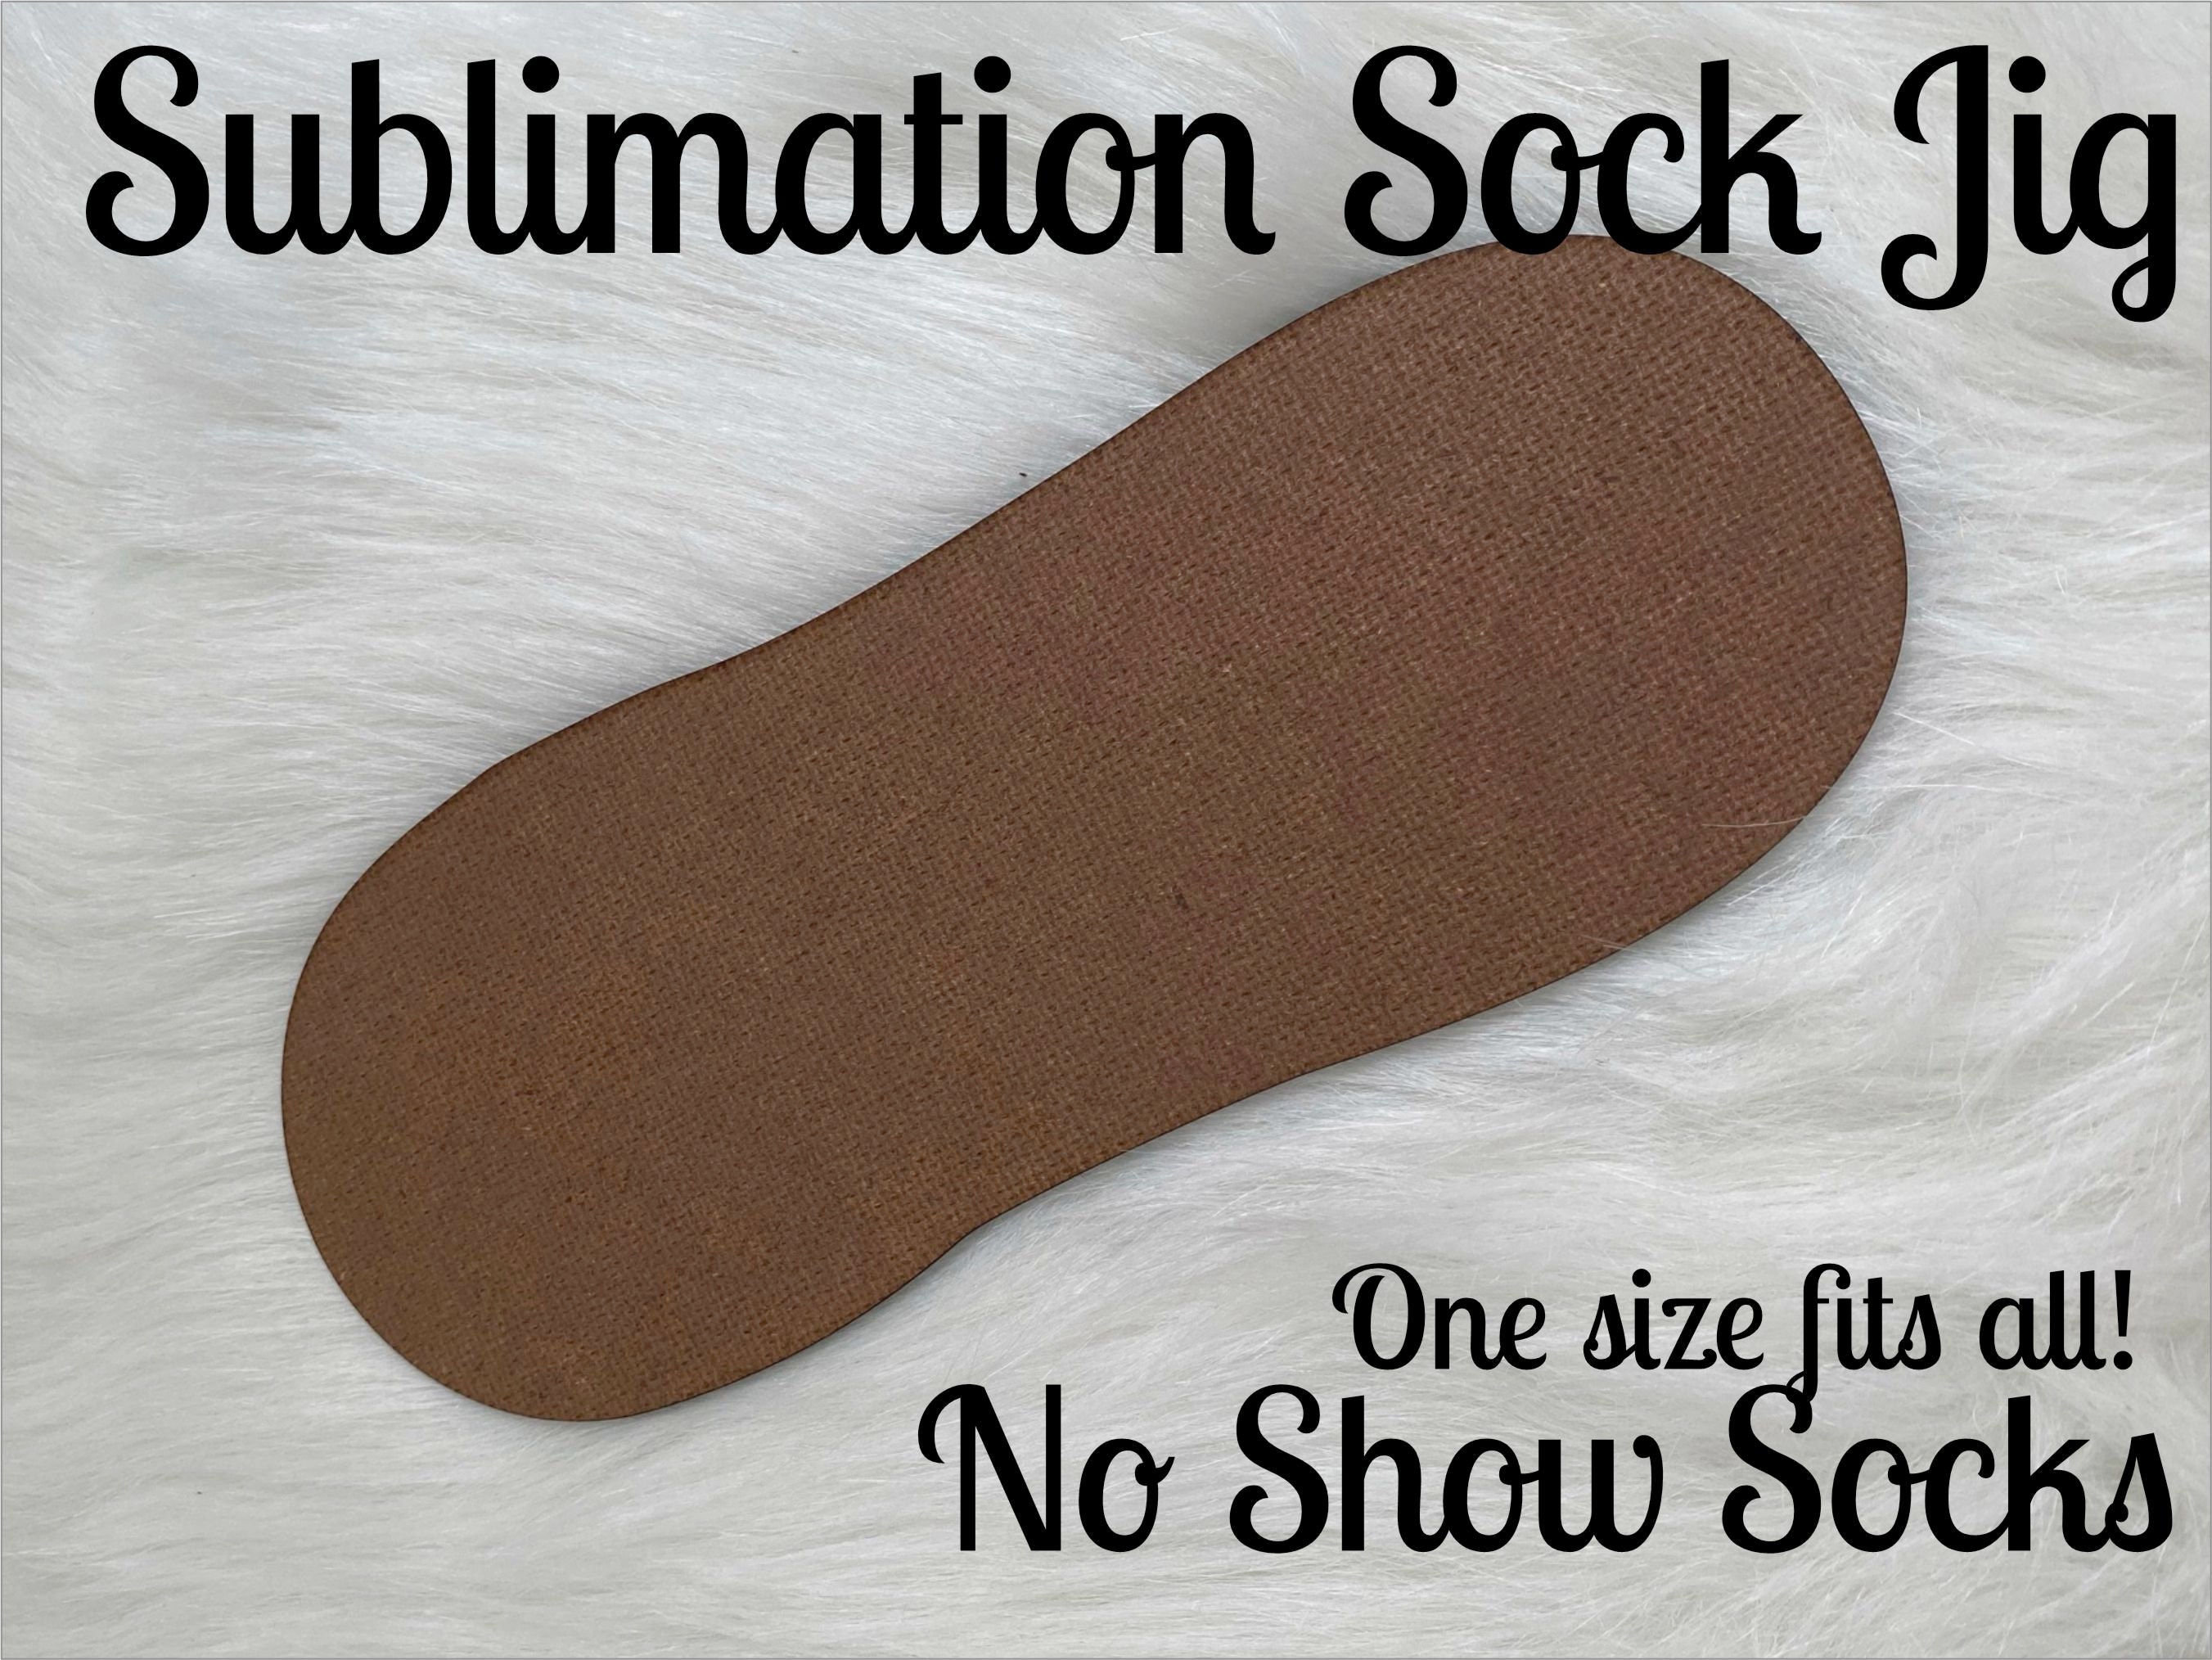 Download Sublimation Sock Jig No show Sock Jig One size fits all | Etsy